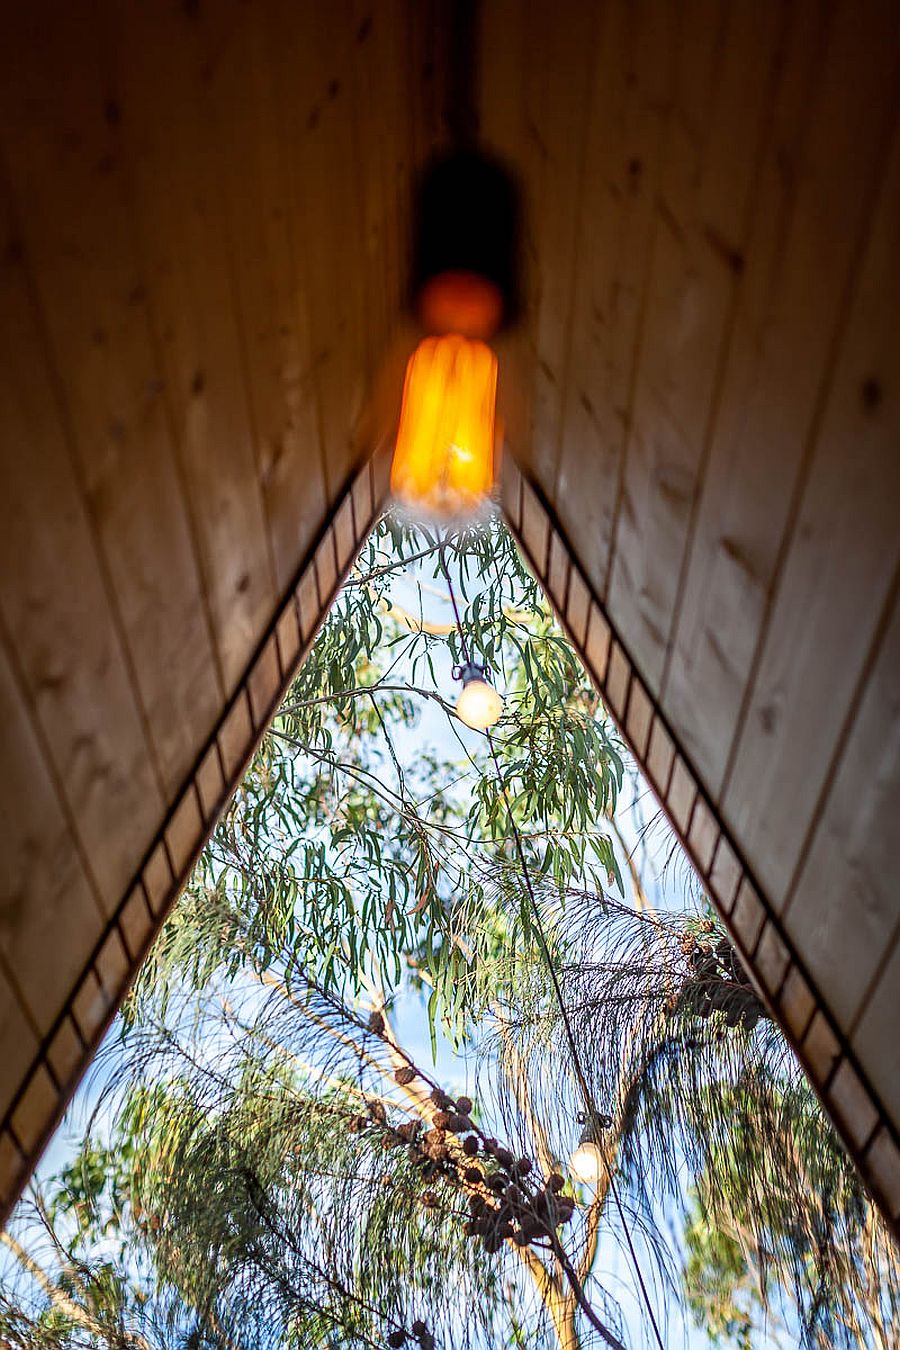 A picture that shows a tree from the point of view of someone standing under the A-frame roof of the house.